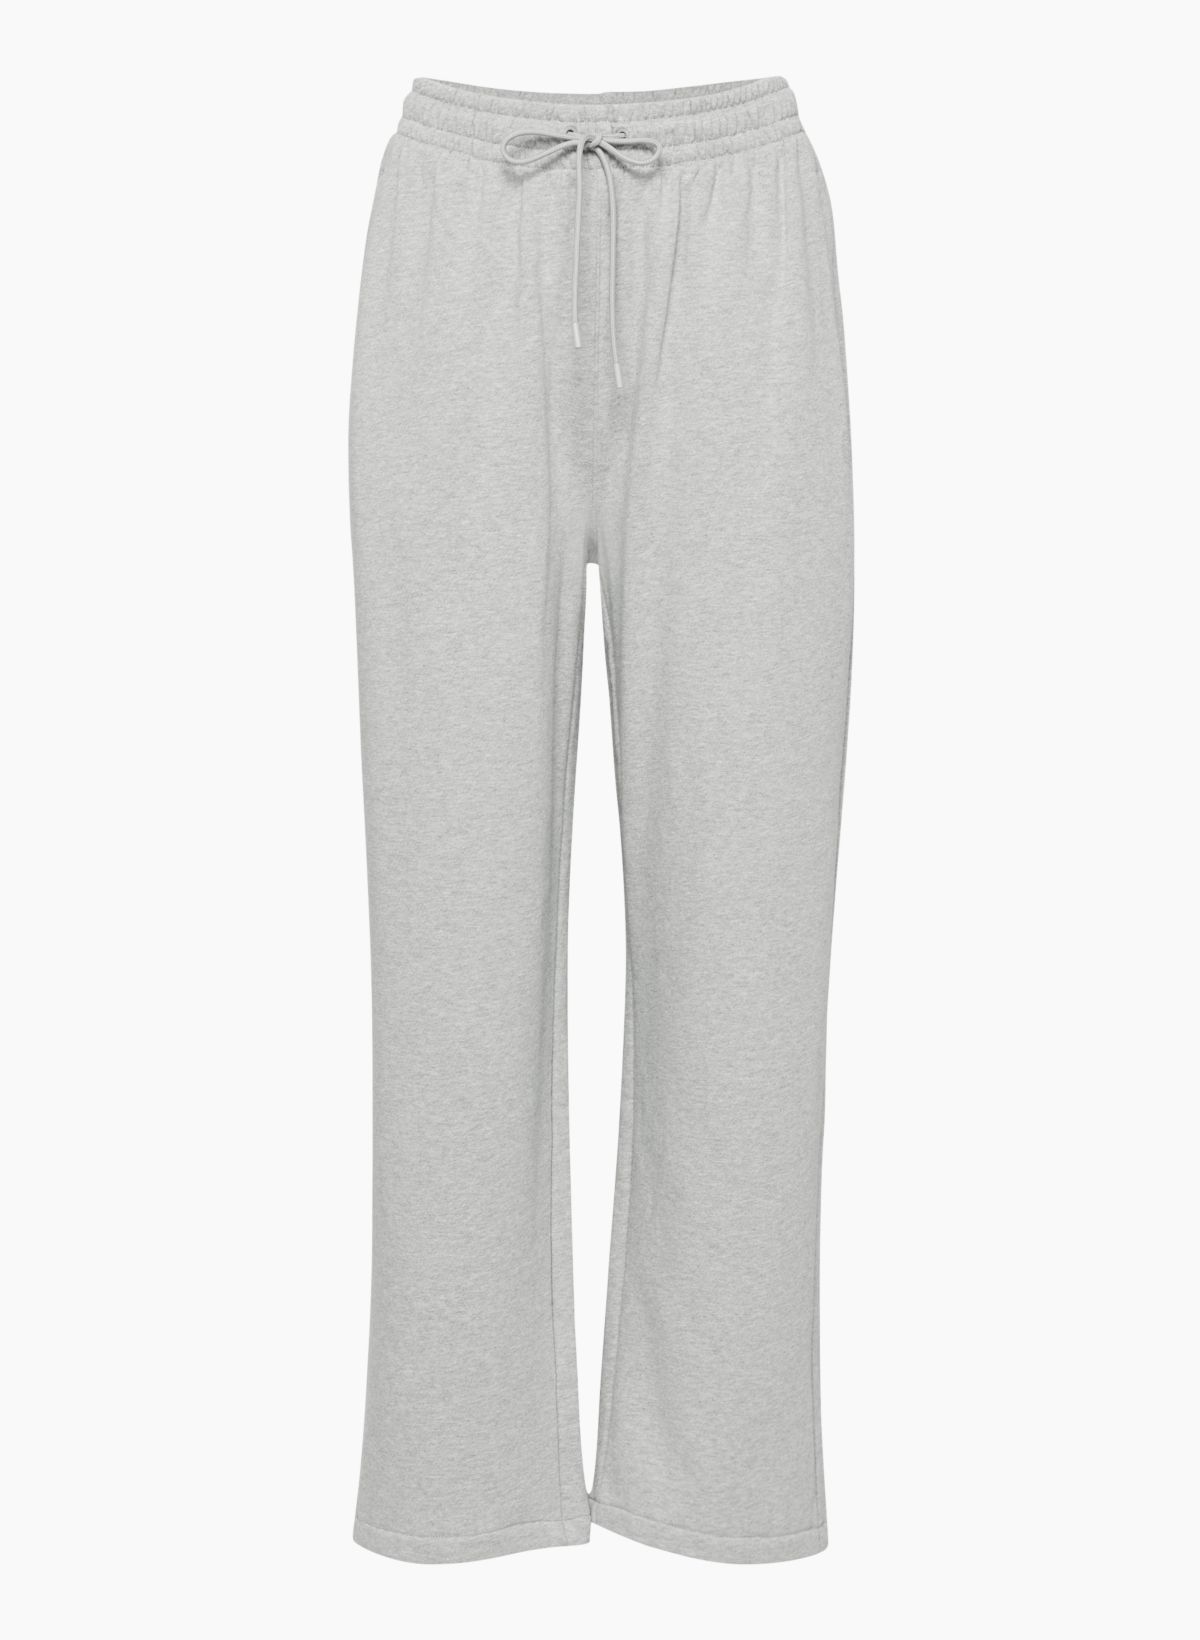 The Group by Babaton QUIETUDE SWEATPANT